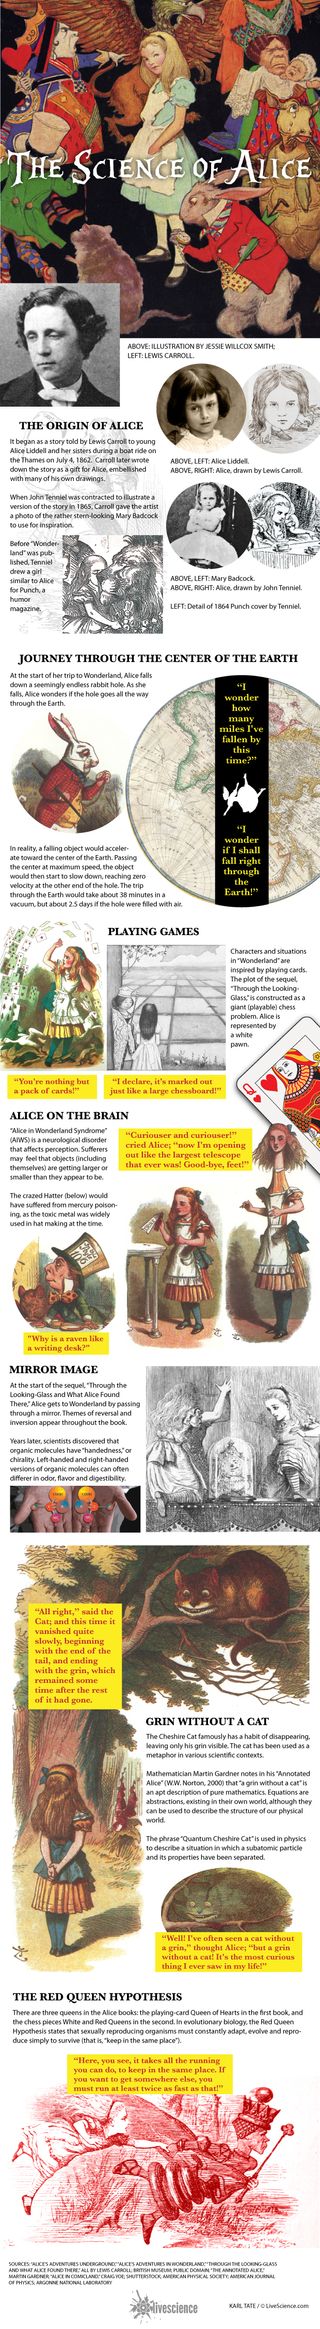 Scientists and mathematicians have always loved many of the metaphors in Lewis Carroll's books.